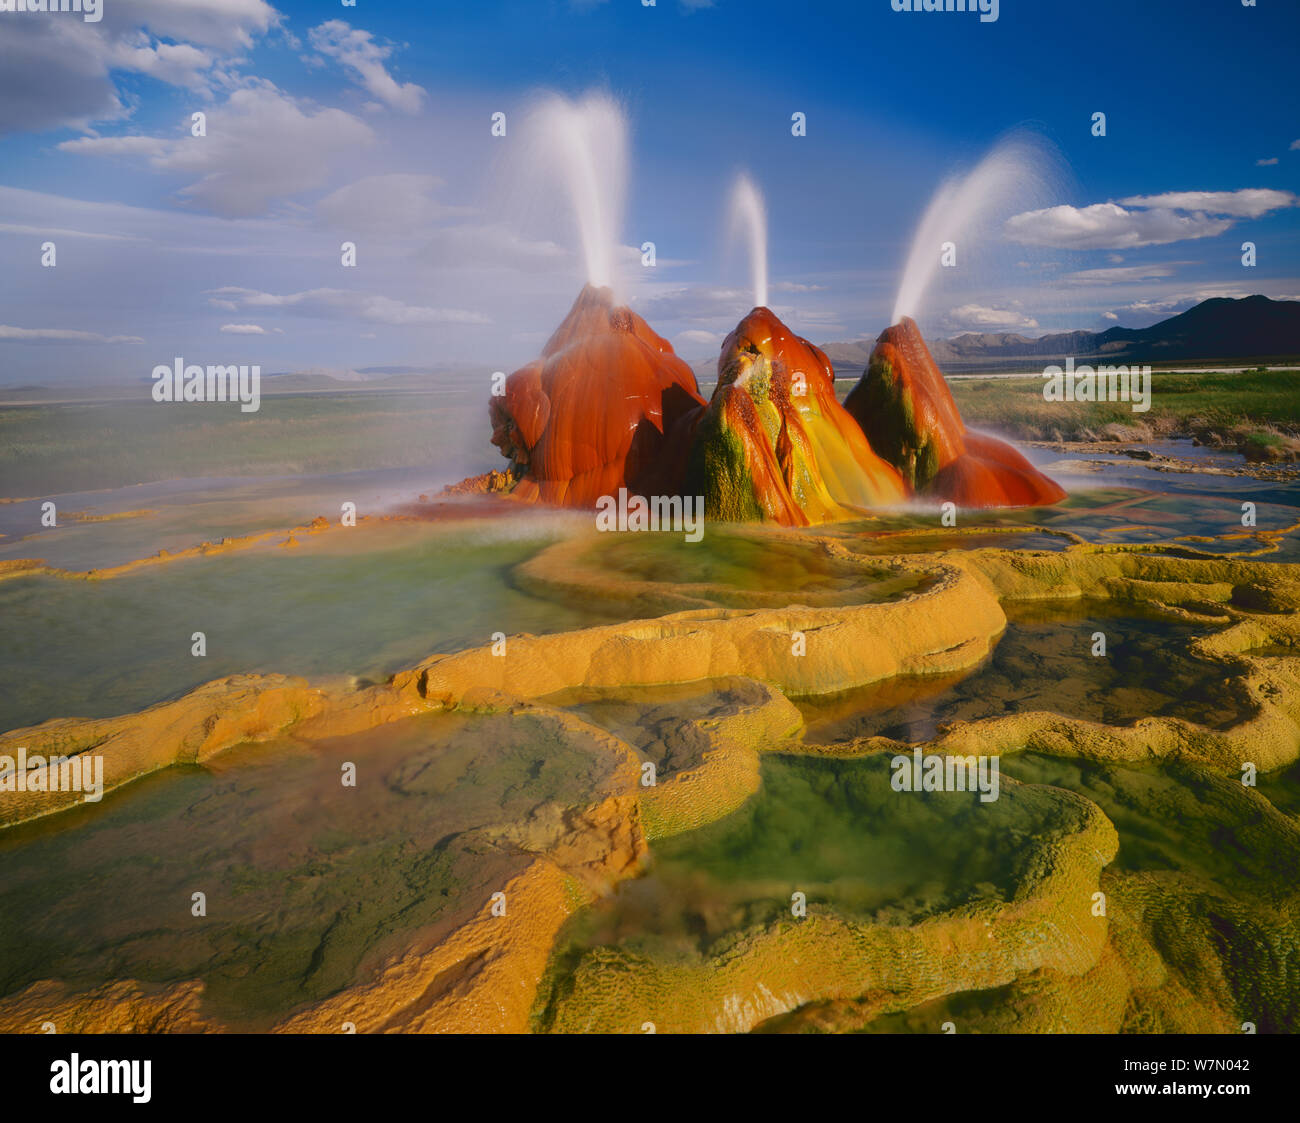 Scalding hot water continuously spouting behind layers of mineral deposits, Fly Geyser, Black Rock Desert, Great Basin Desert, Nevada, USA Stock Photo